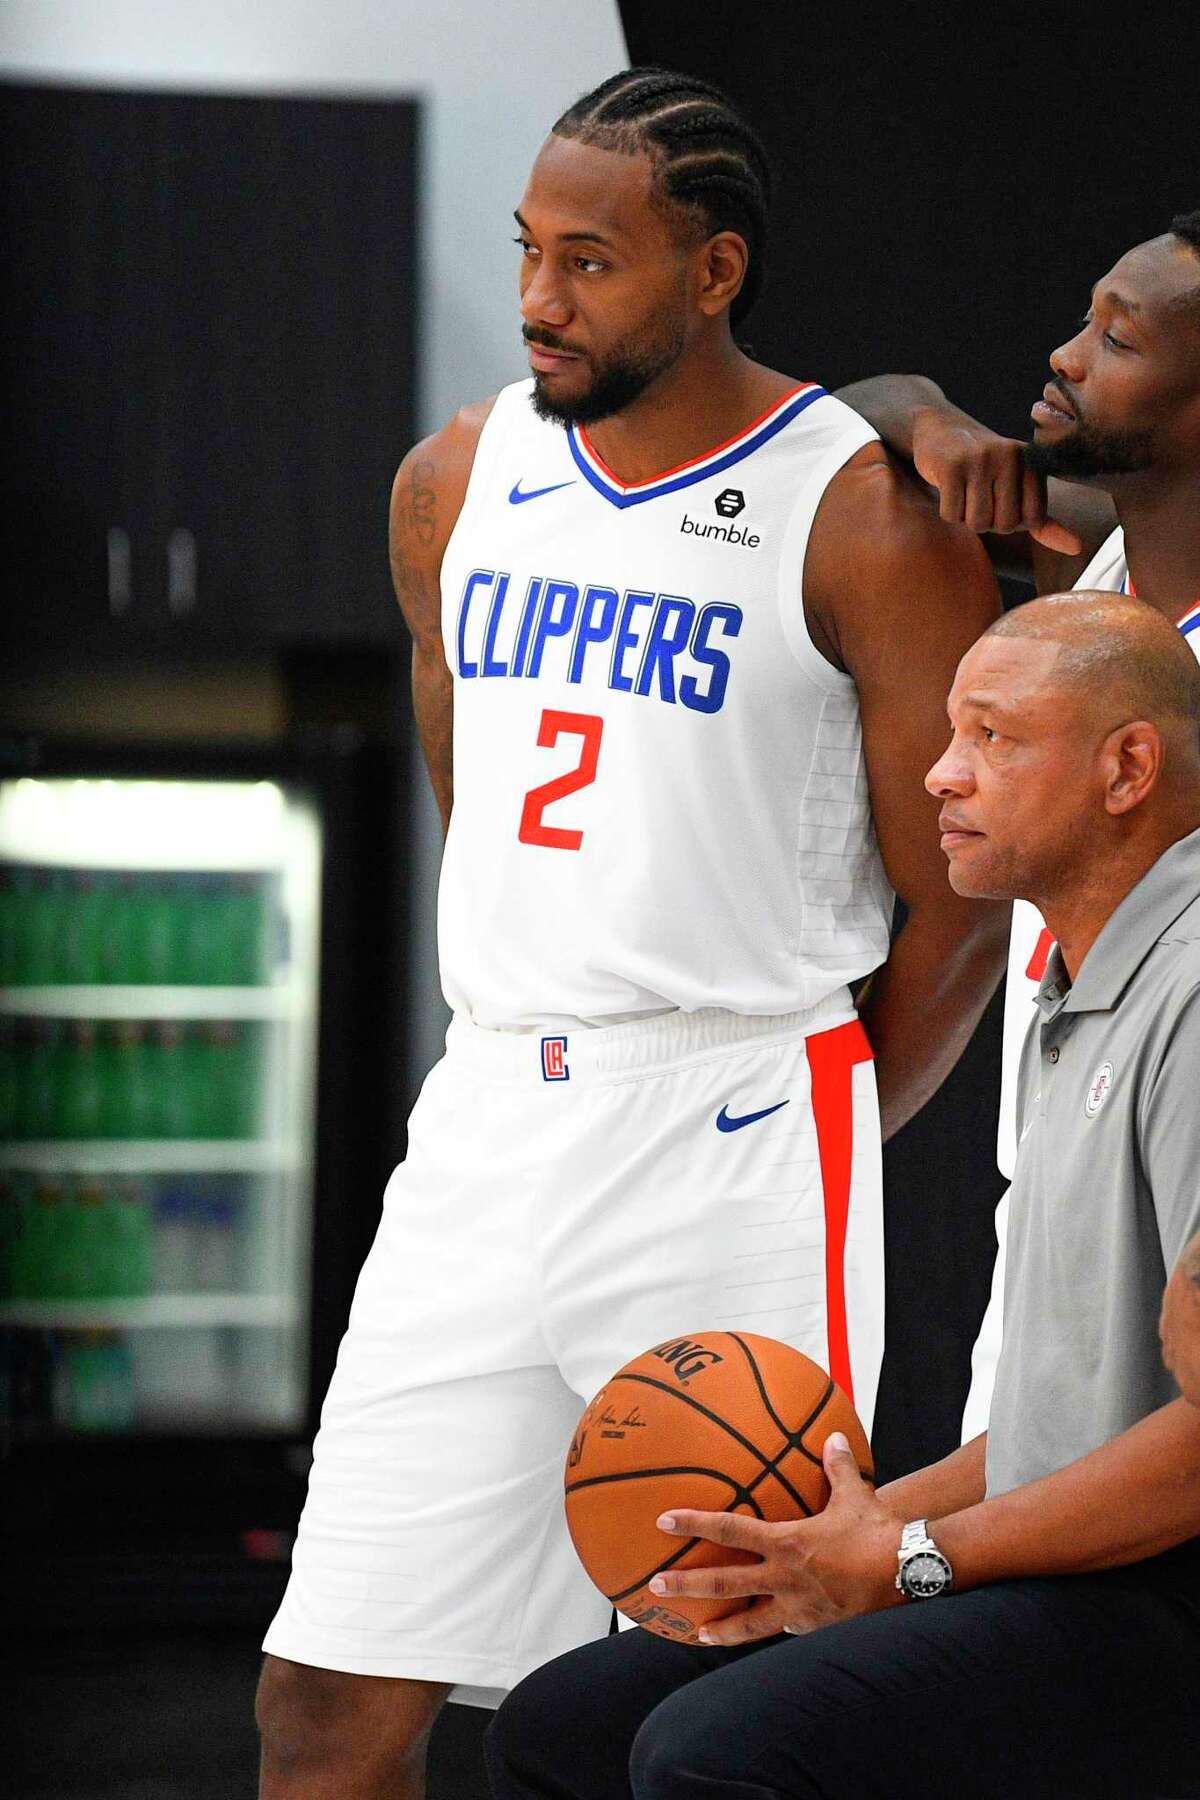 PLAYA VISTA, CA - SEPTEMBER 29: Los Angeles Clippers Forward Kawhi Leonard (2) and Los Angeles Clippers Head Coach Doc Rivers pose for a picture during media day at the Los Angeles Clippers Training Center on September 29, 2019 in Playa Vista, California. (Photo by Brian Rothmuller/Icon Sportswire via Getty Images)